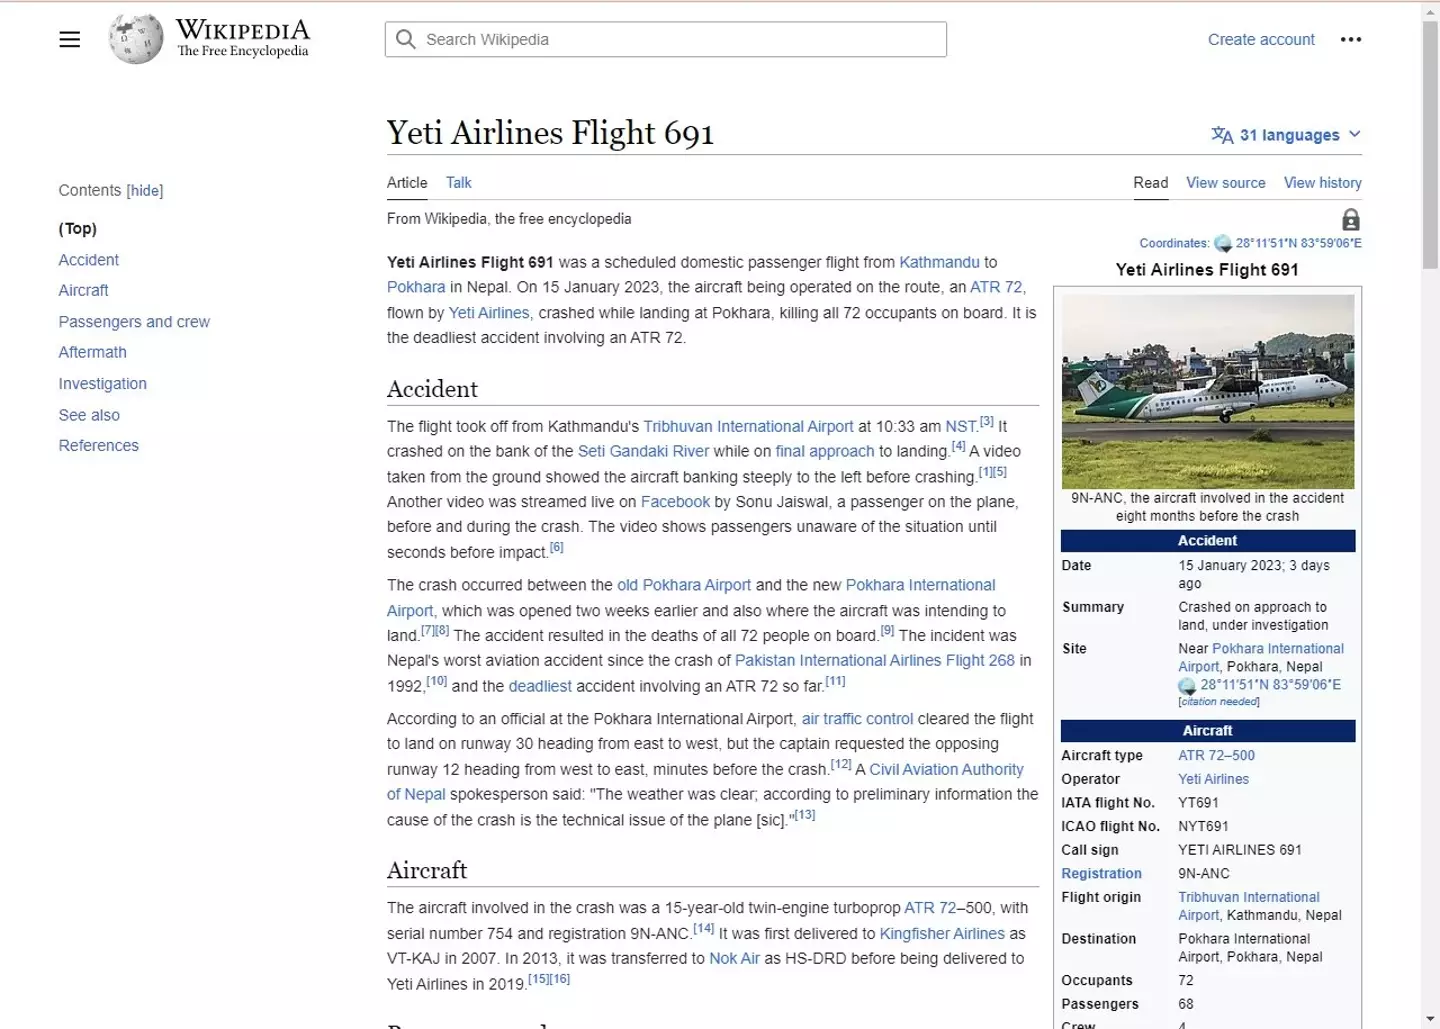 This is what Wikipedia pages look like now.